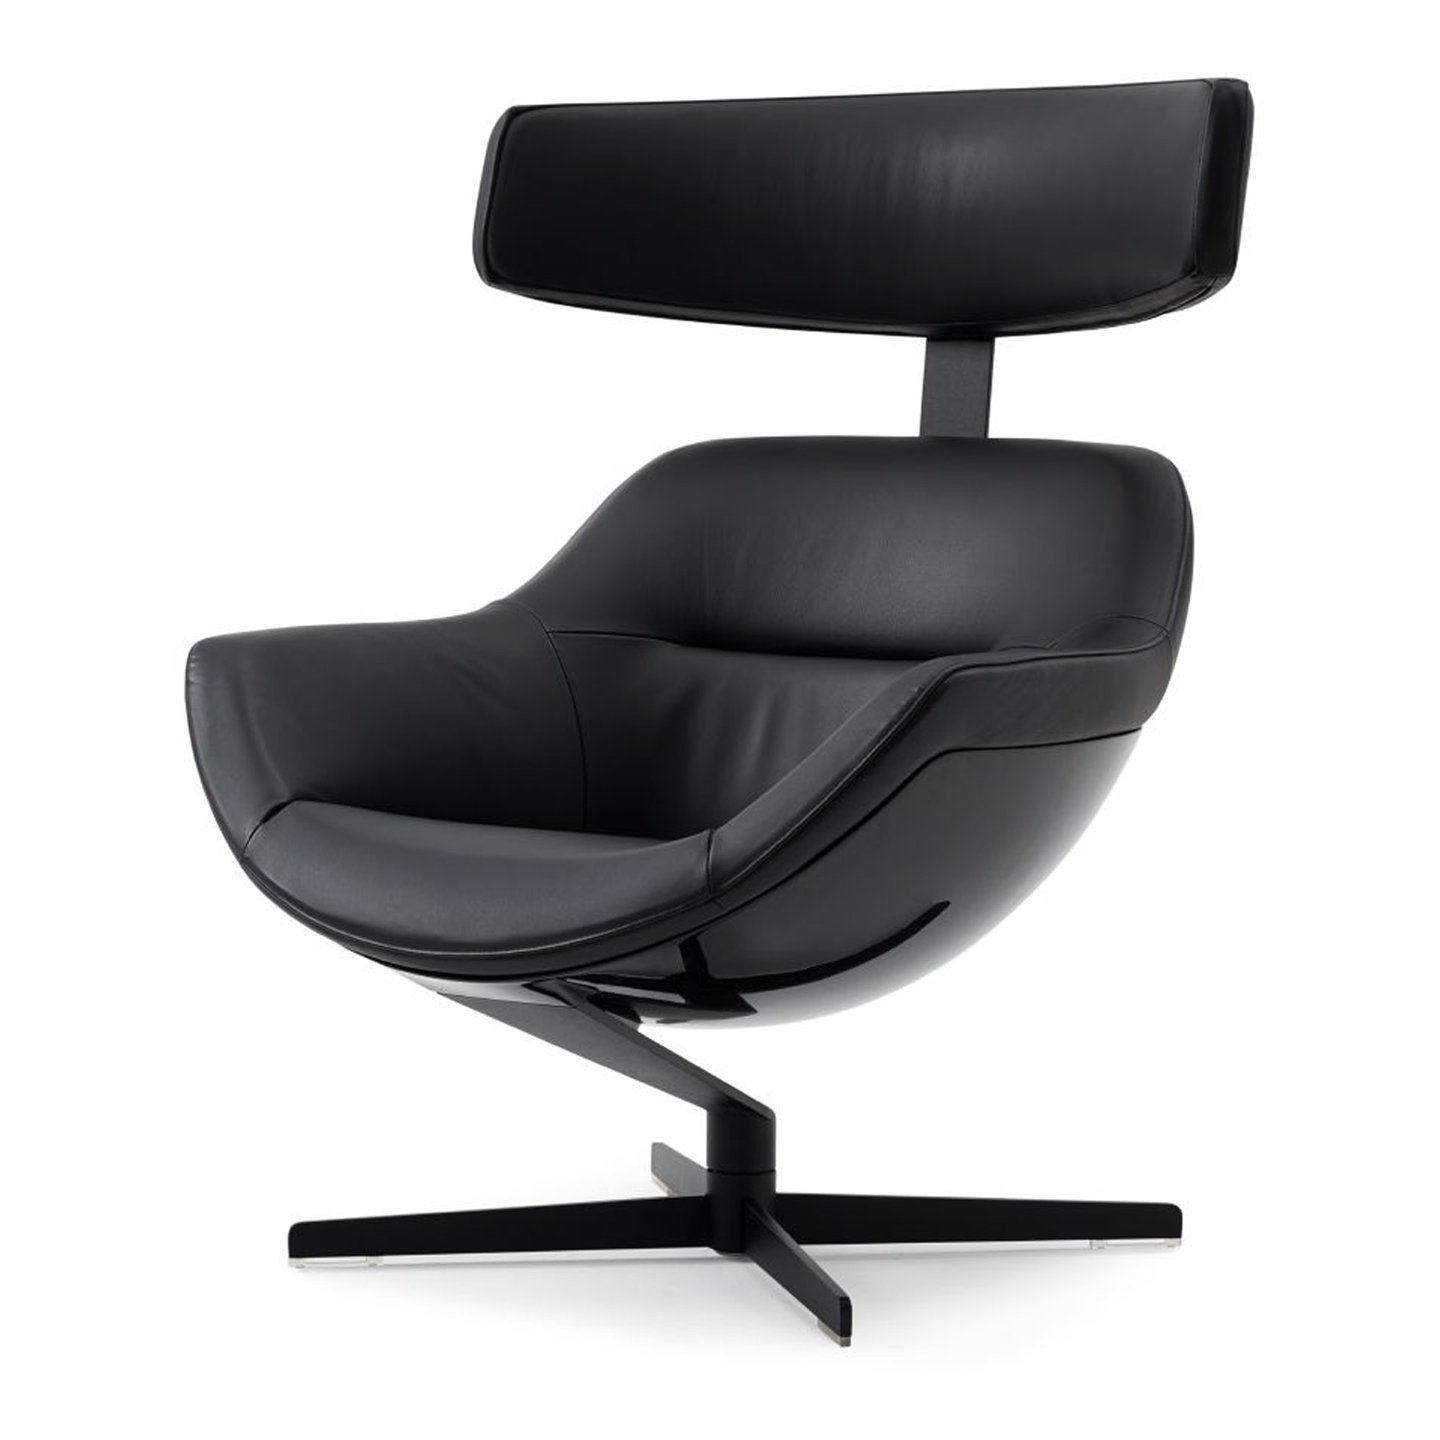 Haworth Auckland chair in black leather